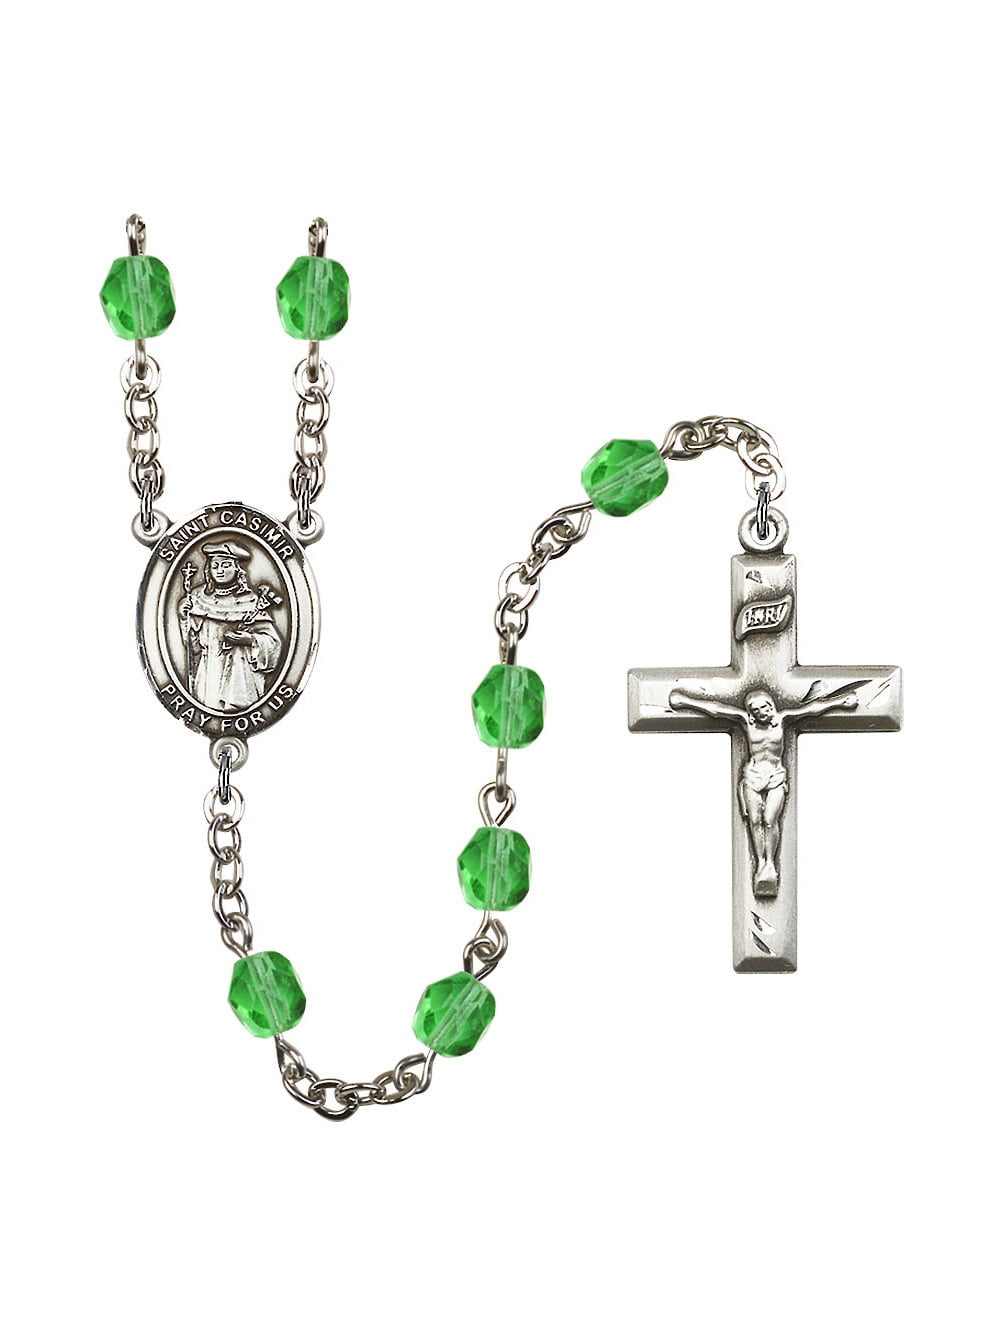 Silver Plate Rosary Bracelet features 6mm Zircon Fire Polished beads The Crucifix measures 5/8 x 1/4 Patron Saint Bachelors/Poland The charm features a St Casimir of Poland medal 